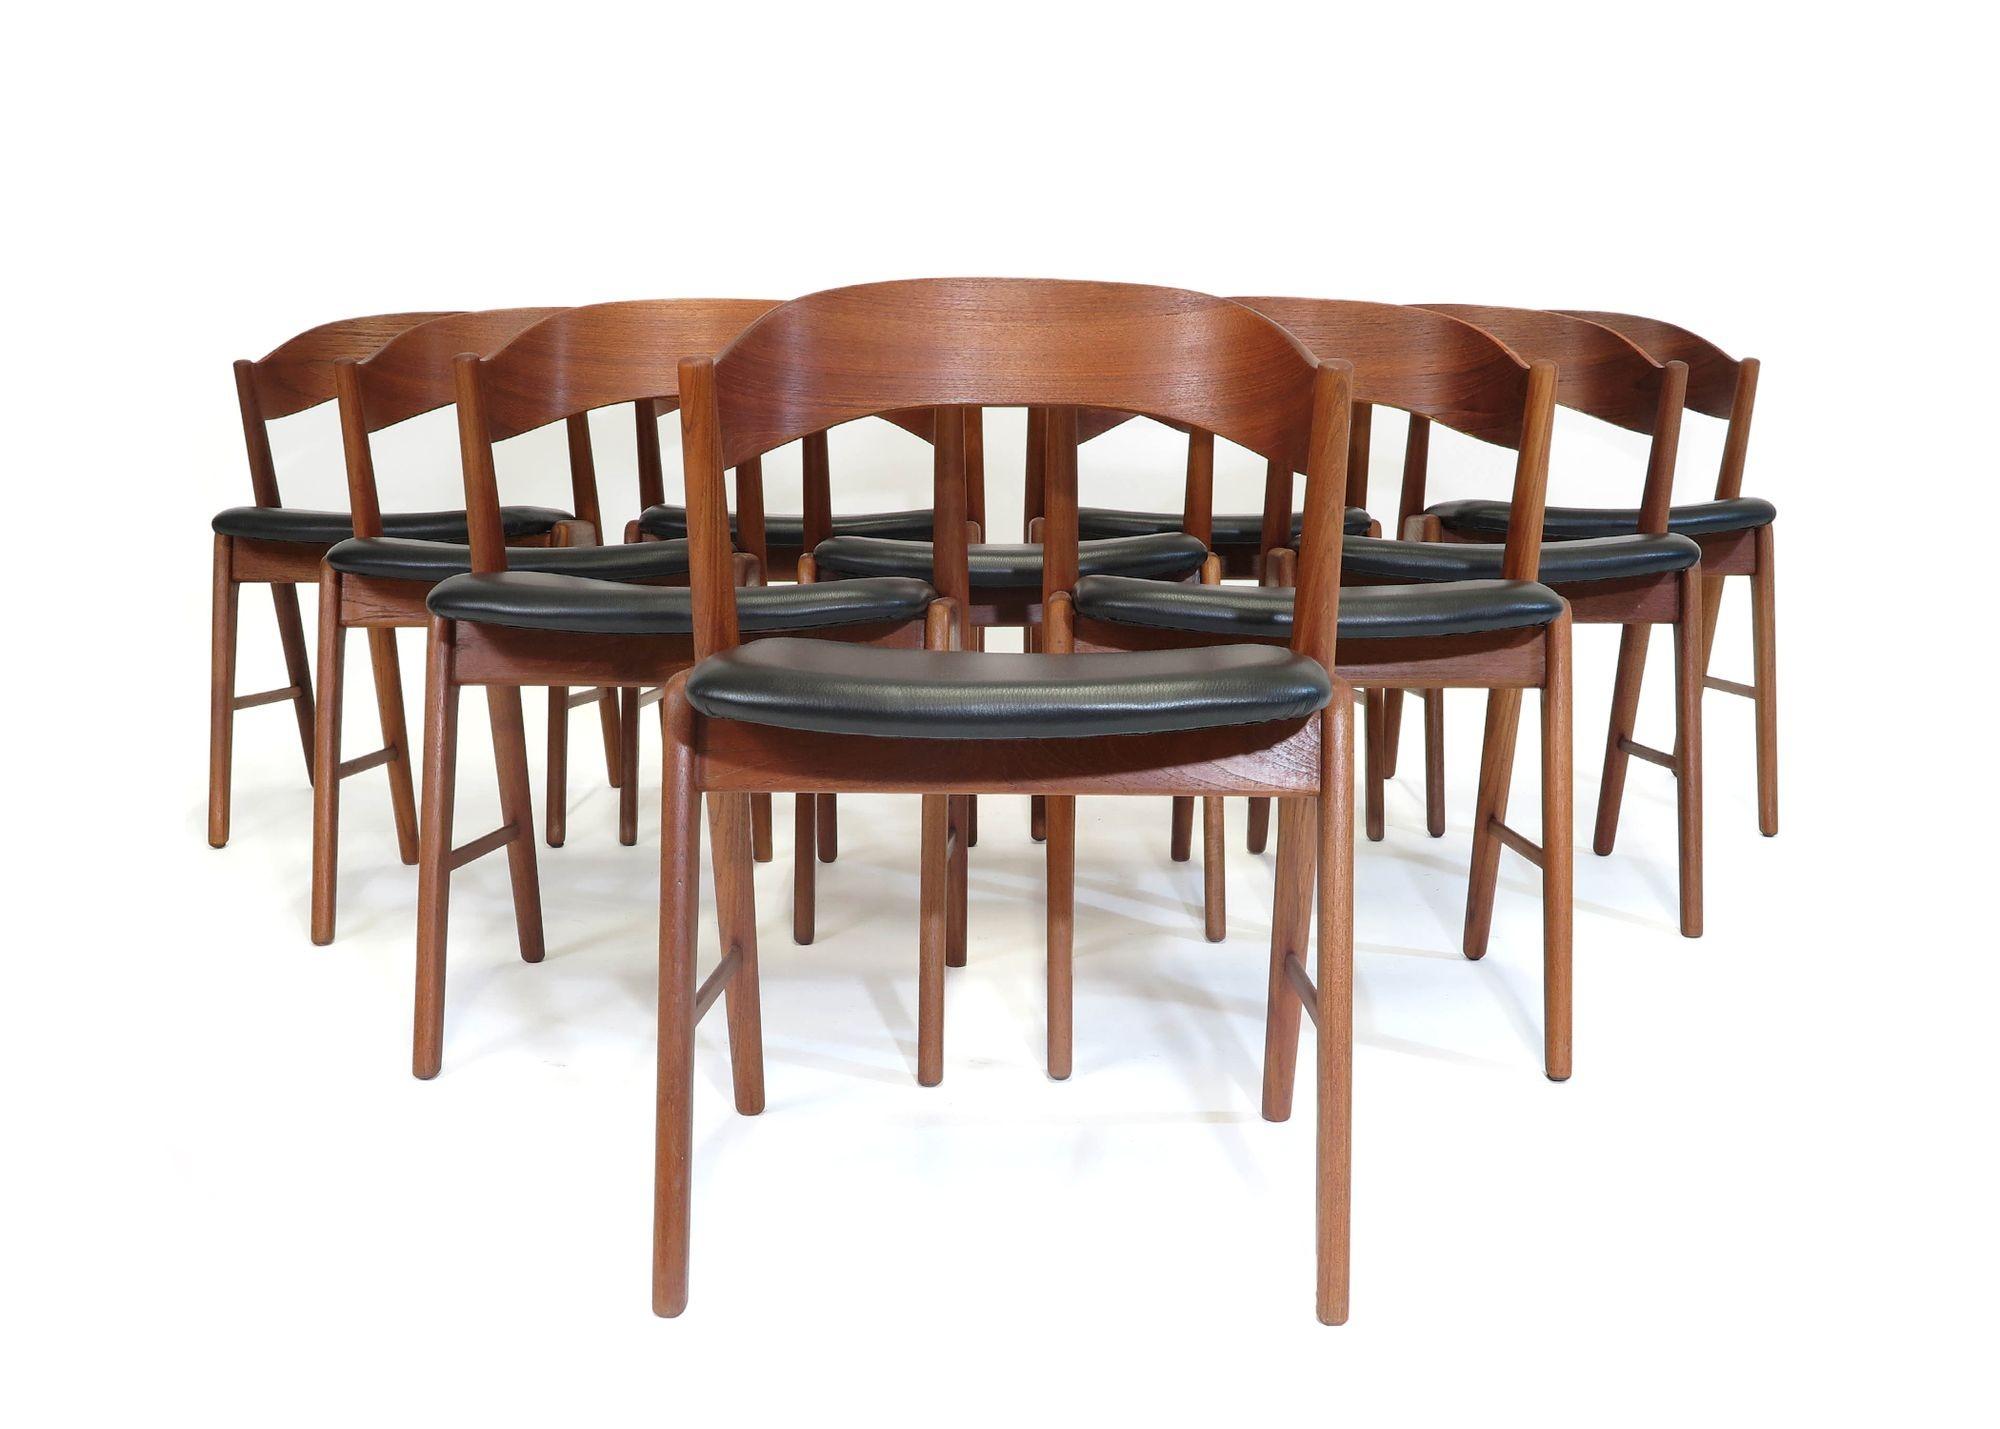 Set of ten midcentury Danish dining chairs designed by Kai Kristiansen, 1955, Denmark. The chairs are handcrafted of teak with dramatic curved backrest and cross stretcher. Perfectly restored frames in a natural oil finish, and newly upholstered